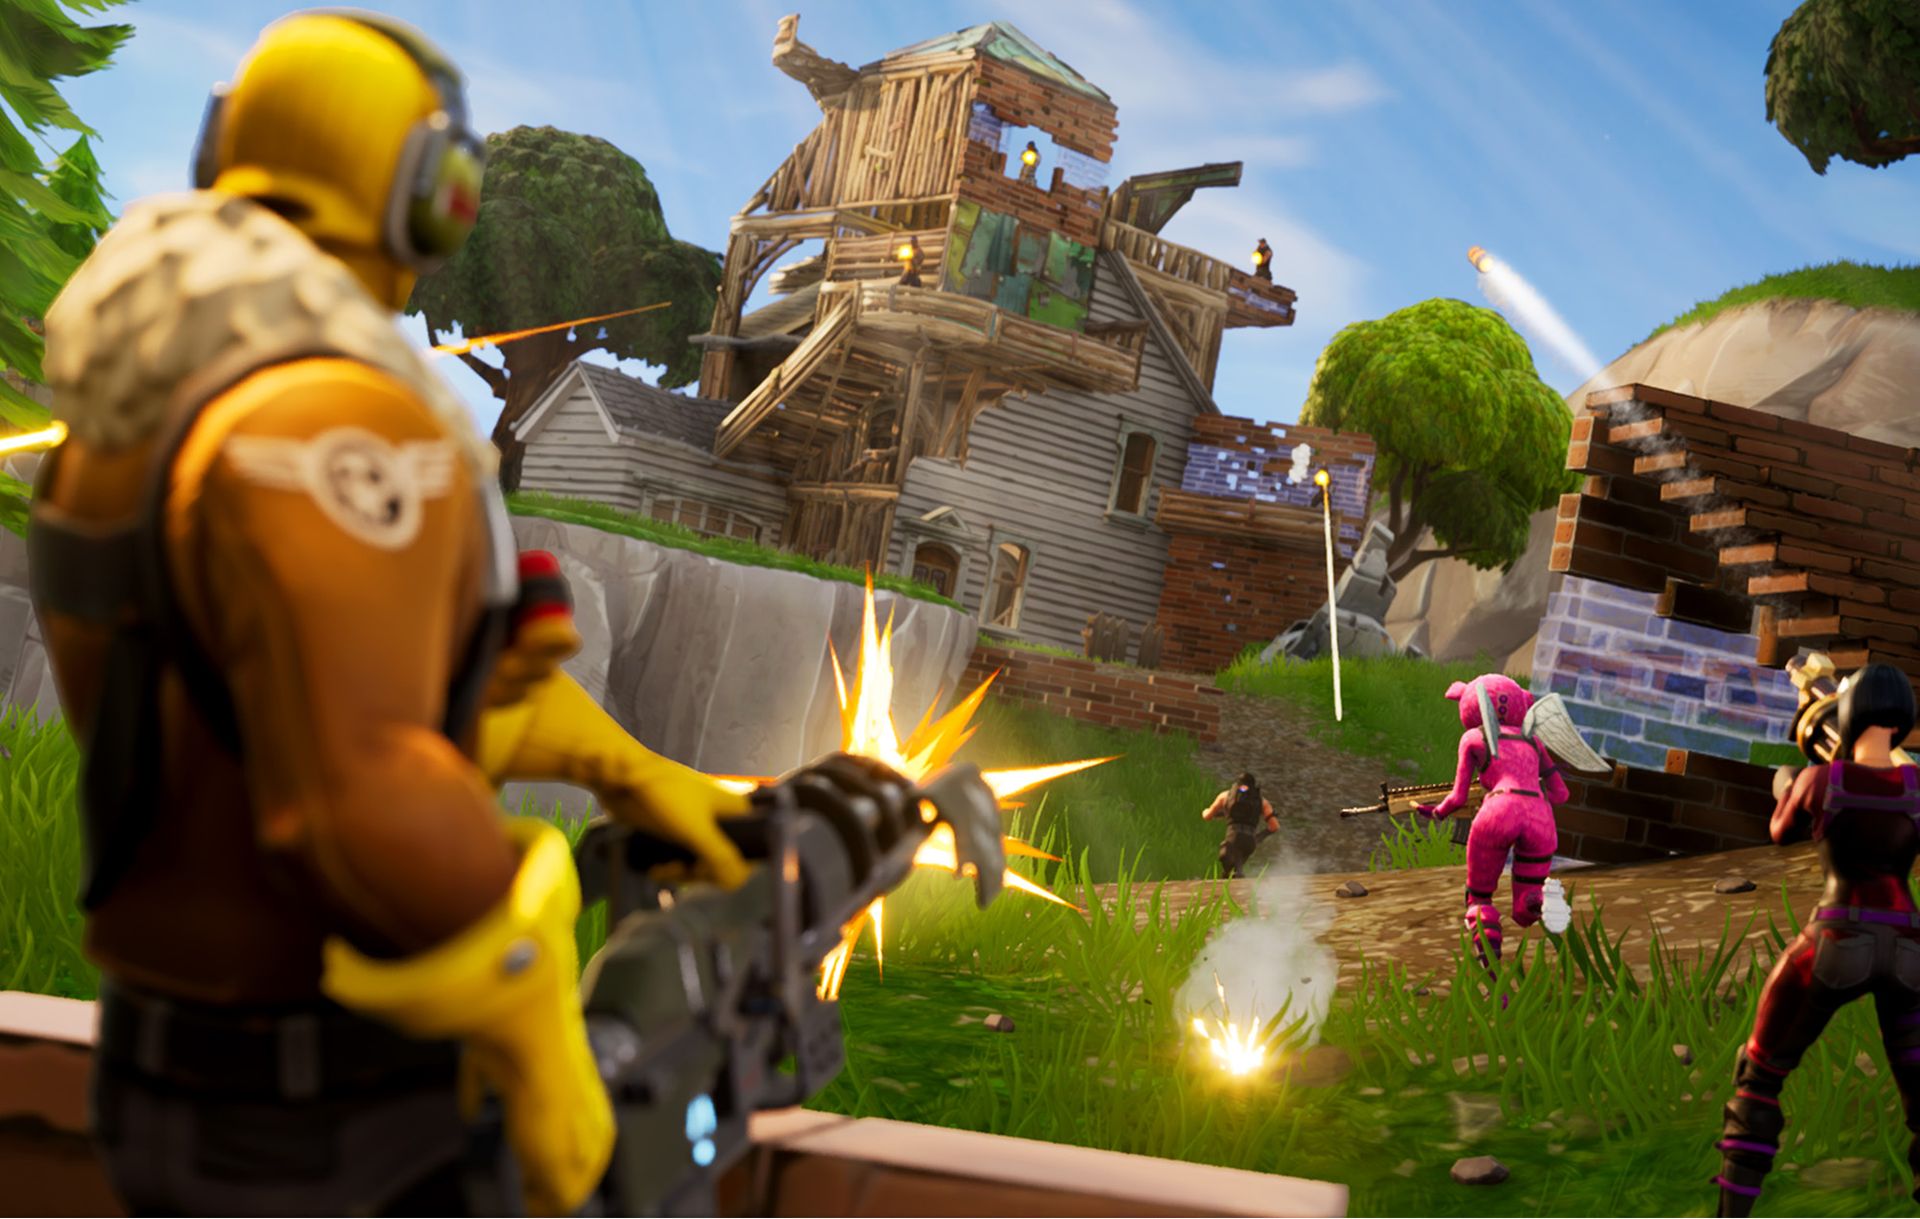 In this article, we are going to go over the Fortnite You do not have permission error fix, so you can enjoy the popular battle royale without any issues.